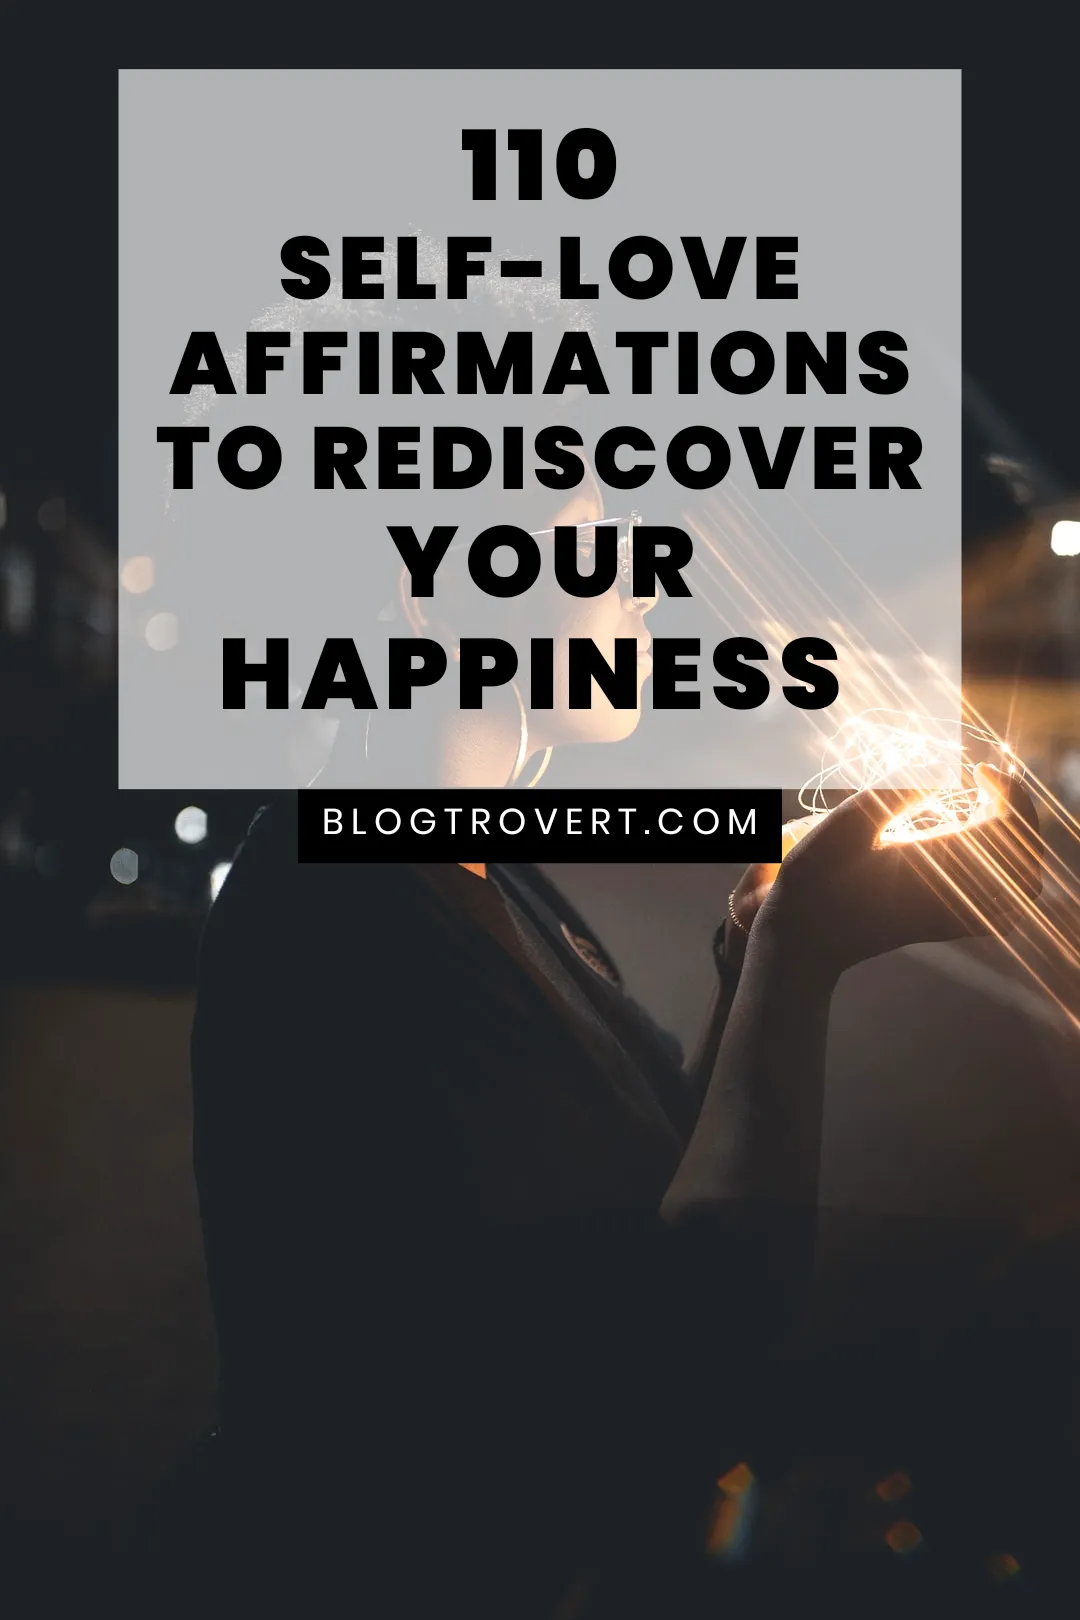 110 Positive Affirmations For Self-love 4